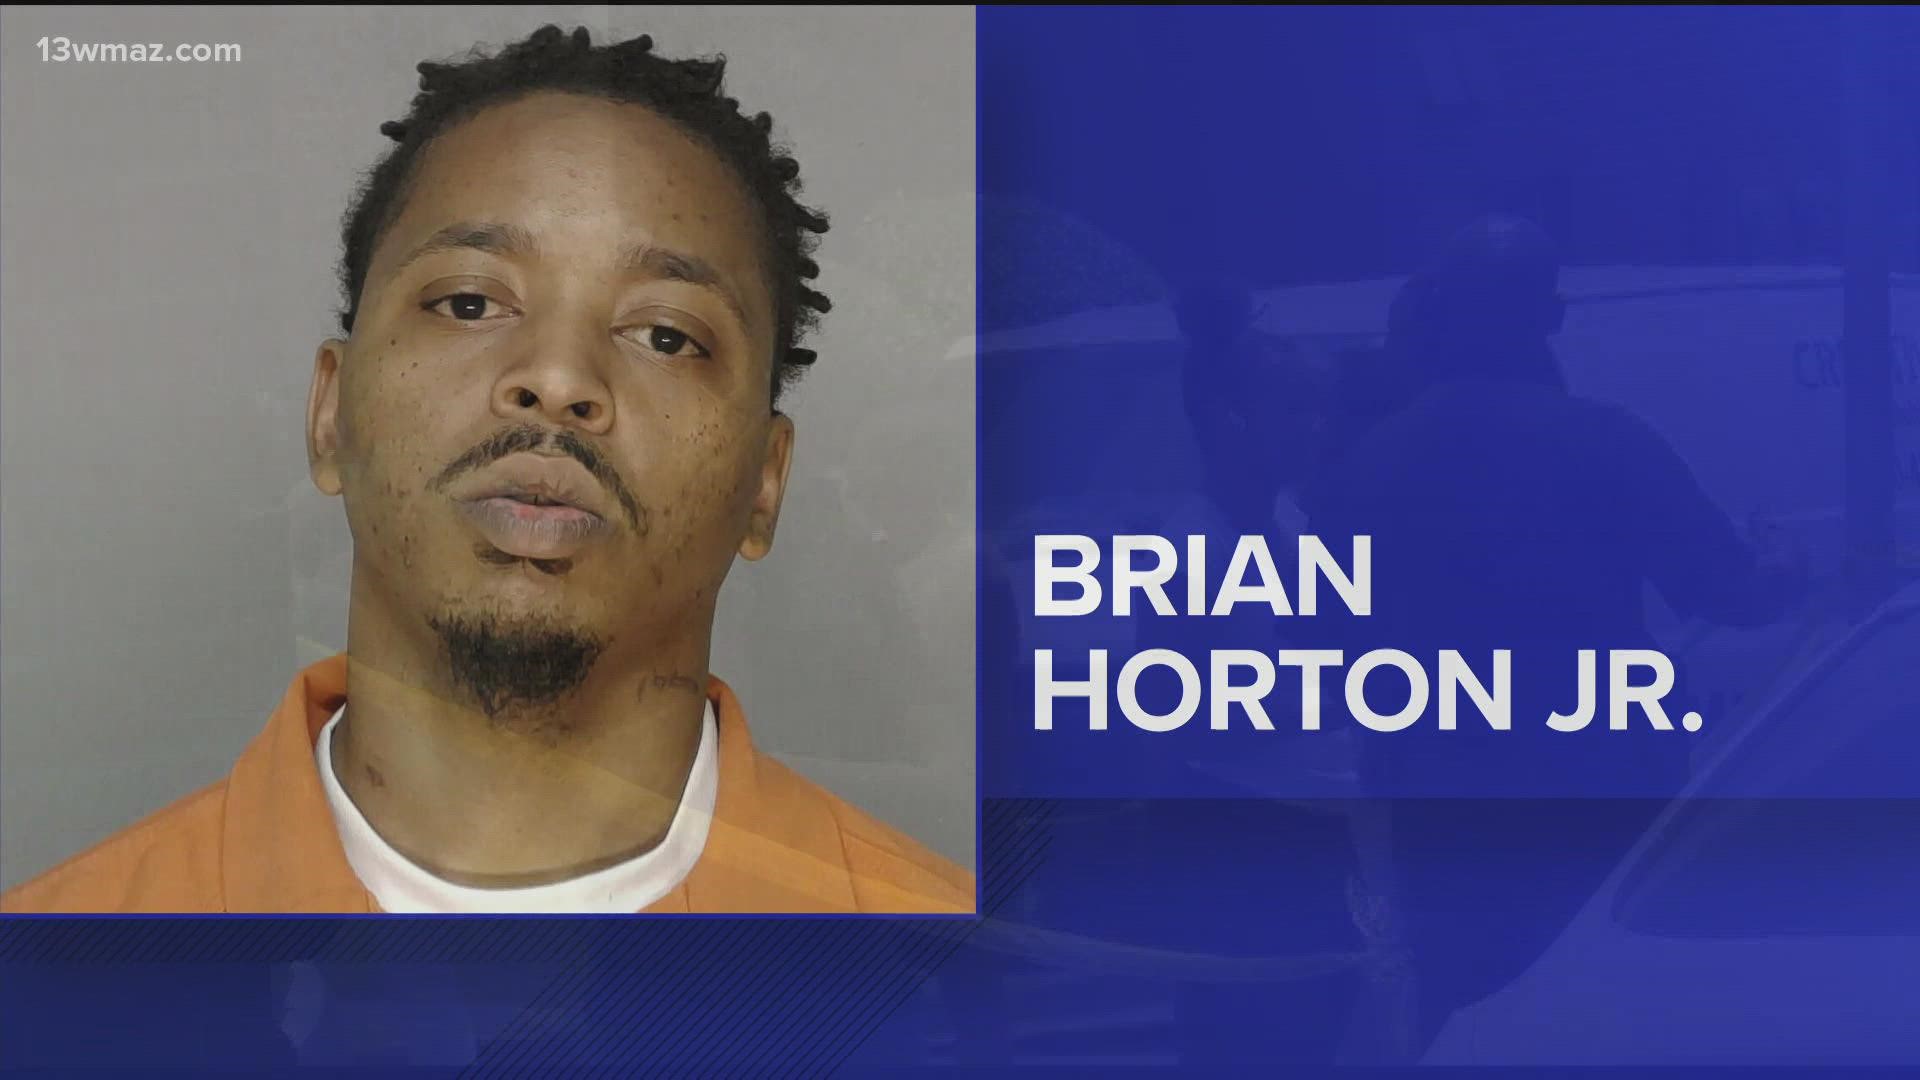 Thanks to a Crimestoppers tip, just after 2 p.m. Thursday, investigators found and arrested 27-year-old Brian Christopher Horton Jr.